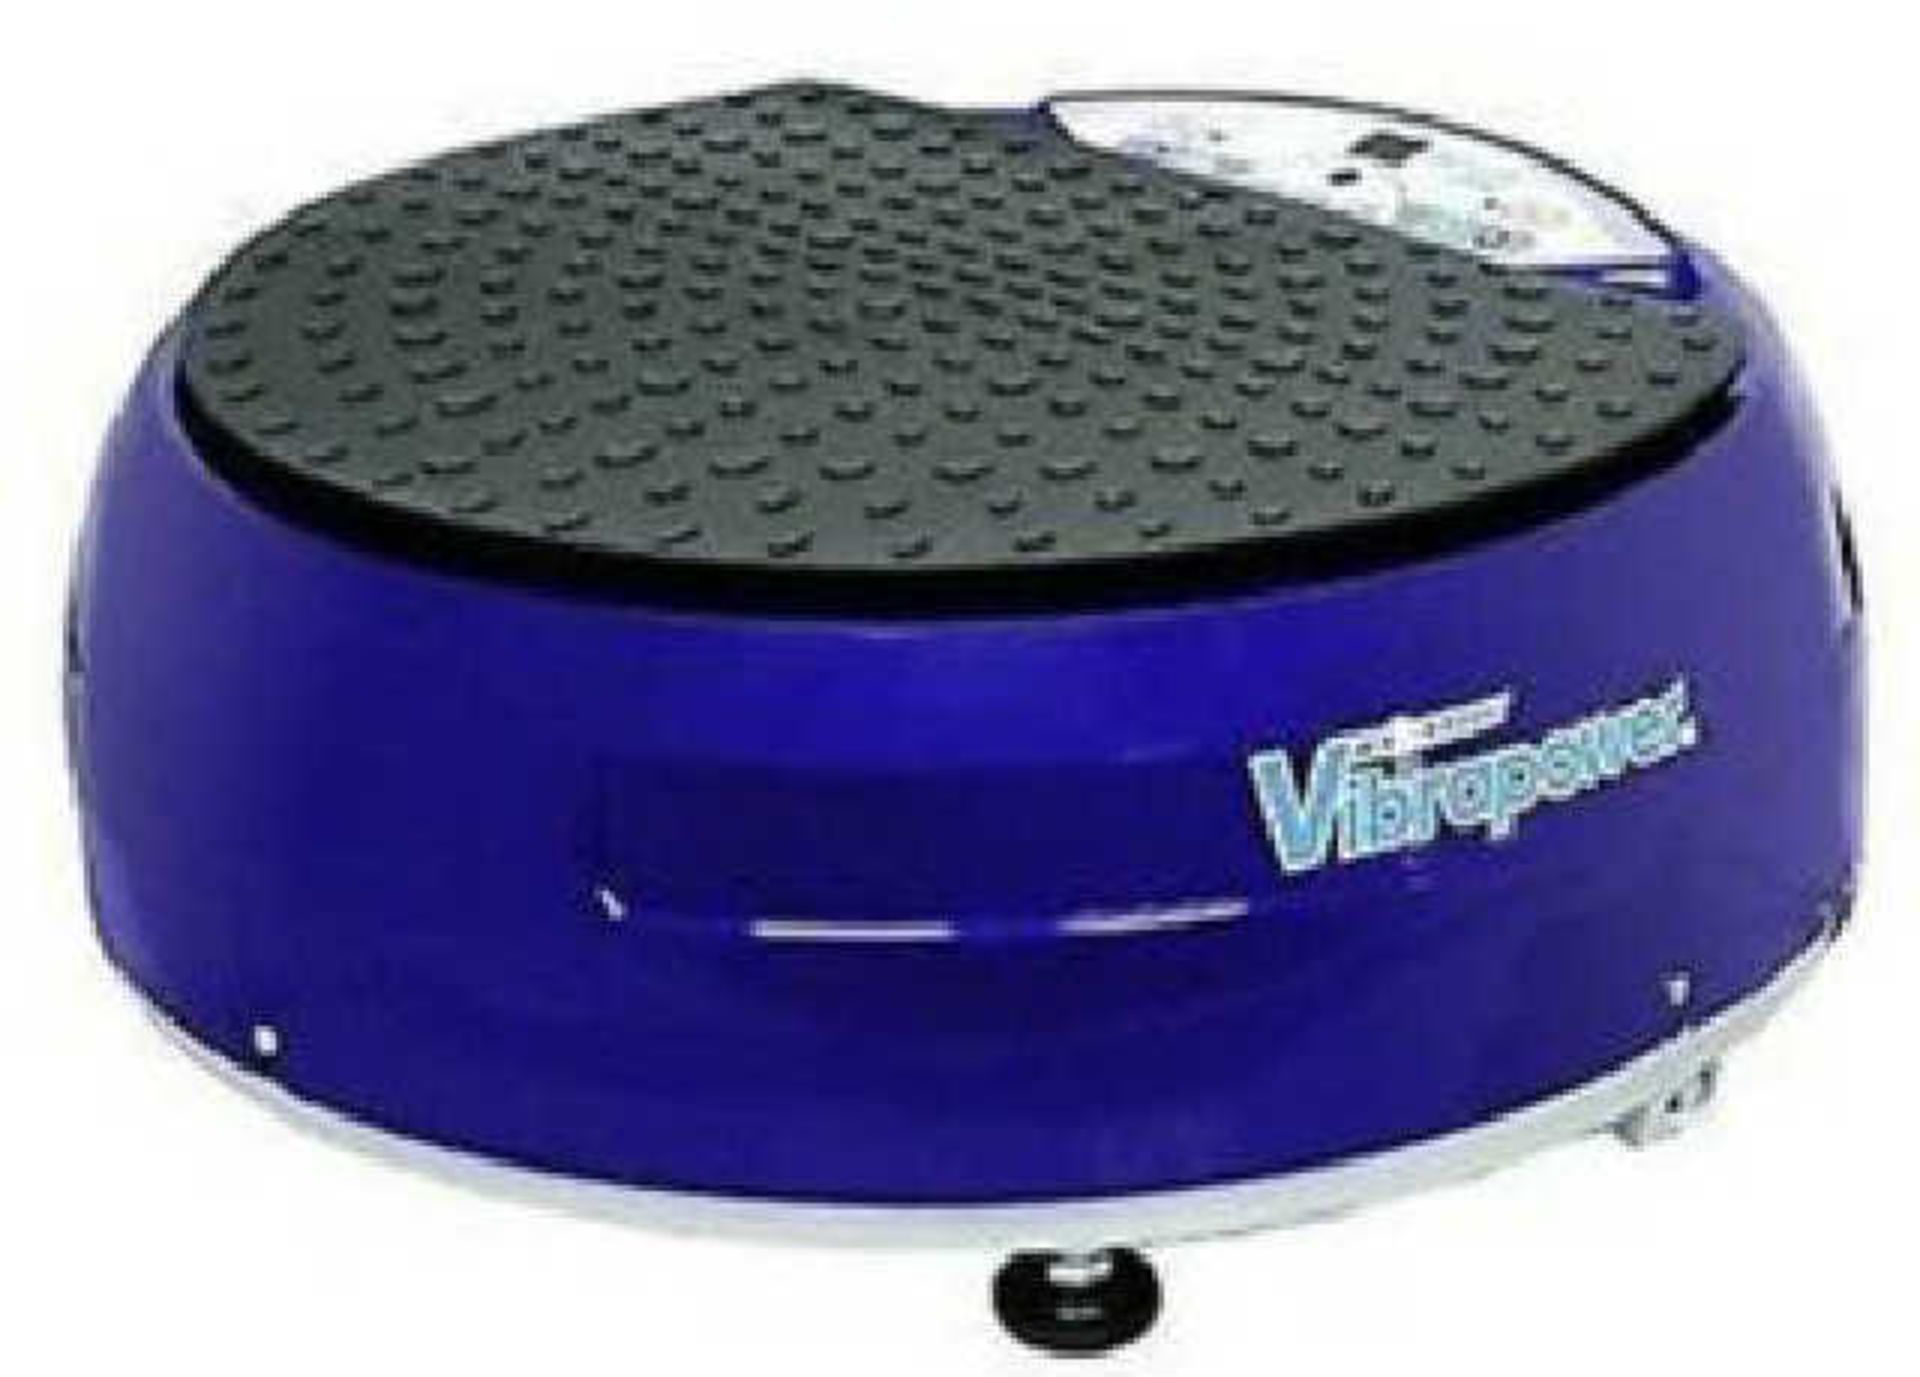 3 VIBRAPOWER DISCS WITH RESISTANCE BANDS